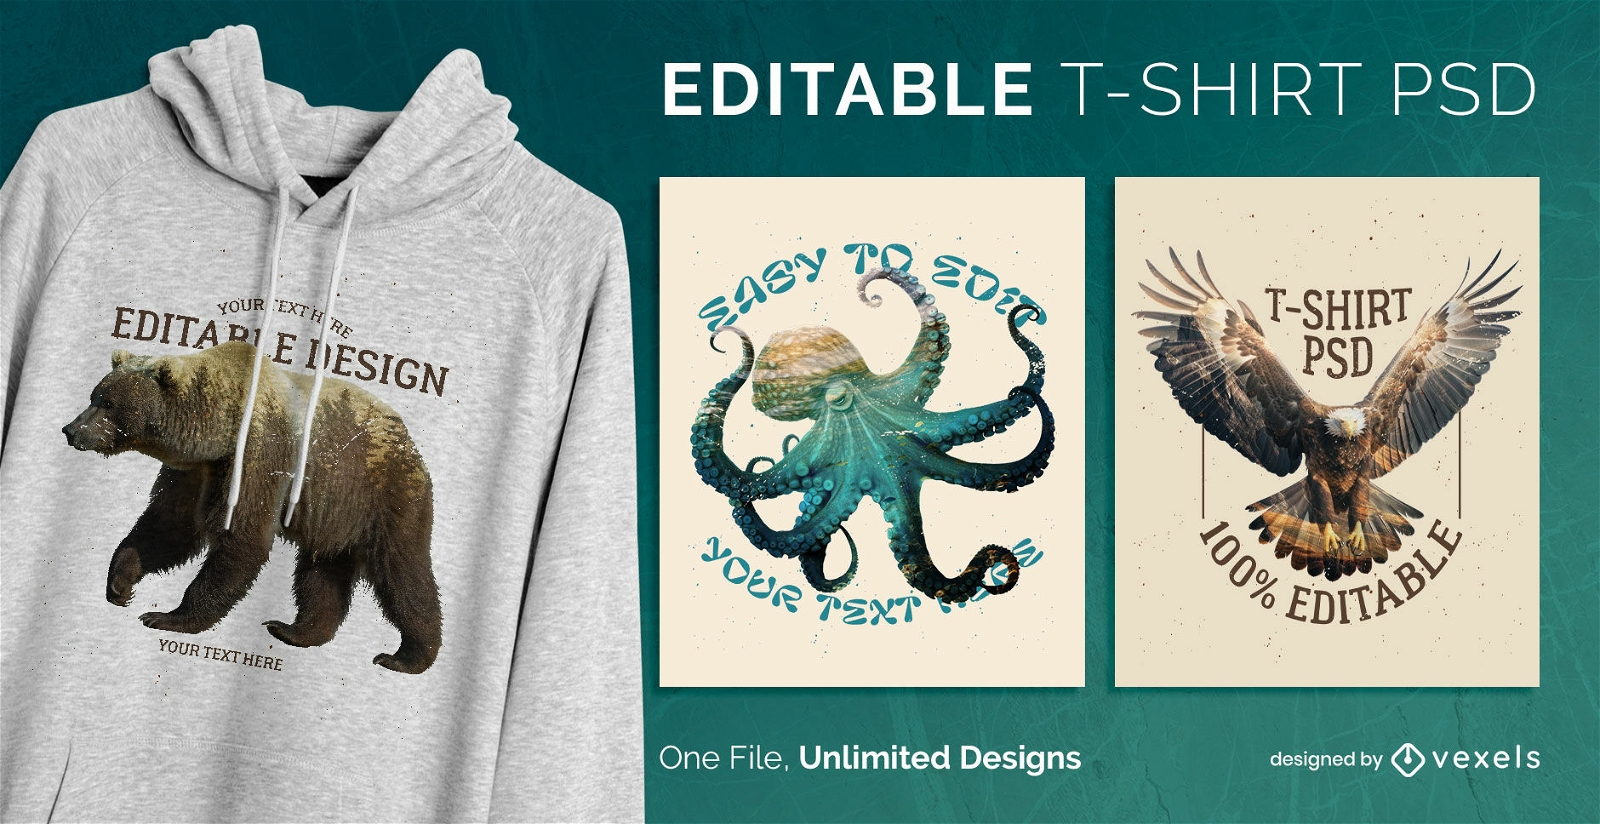 Realistic animals scalable t-shirt psd